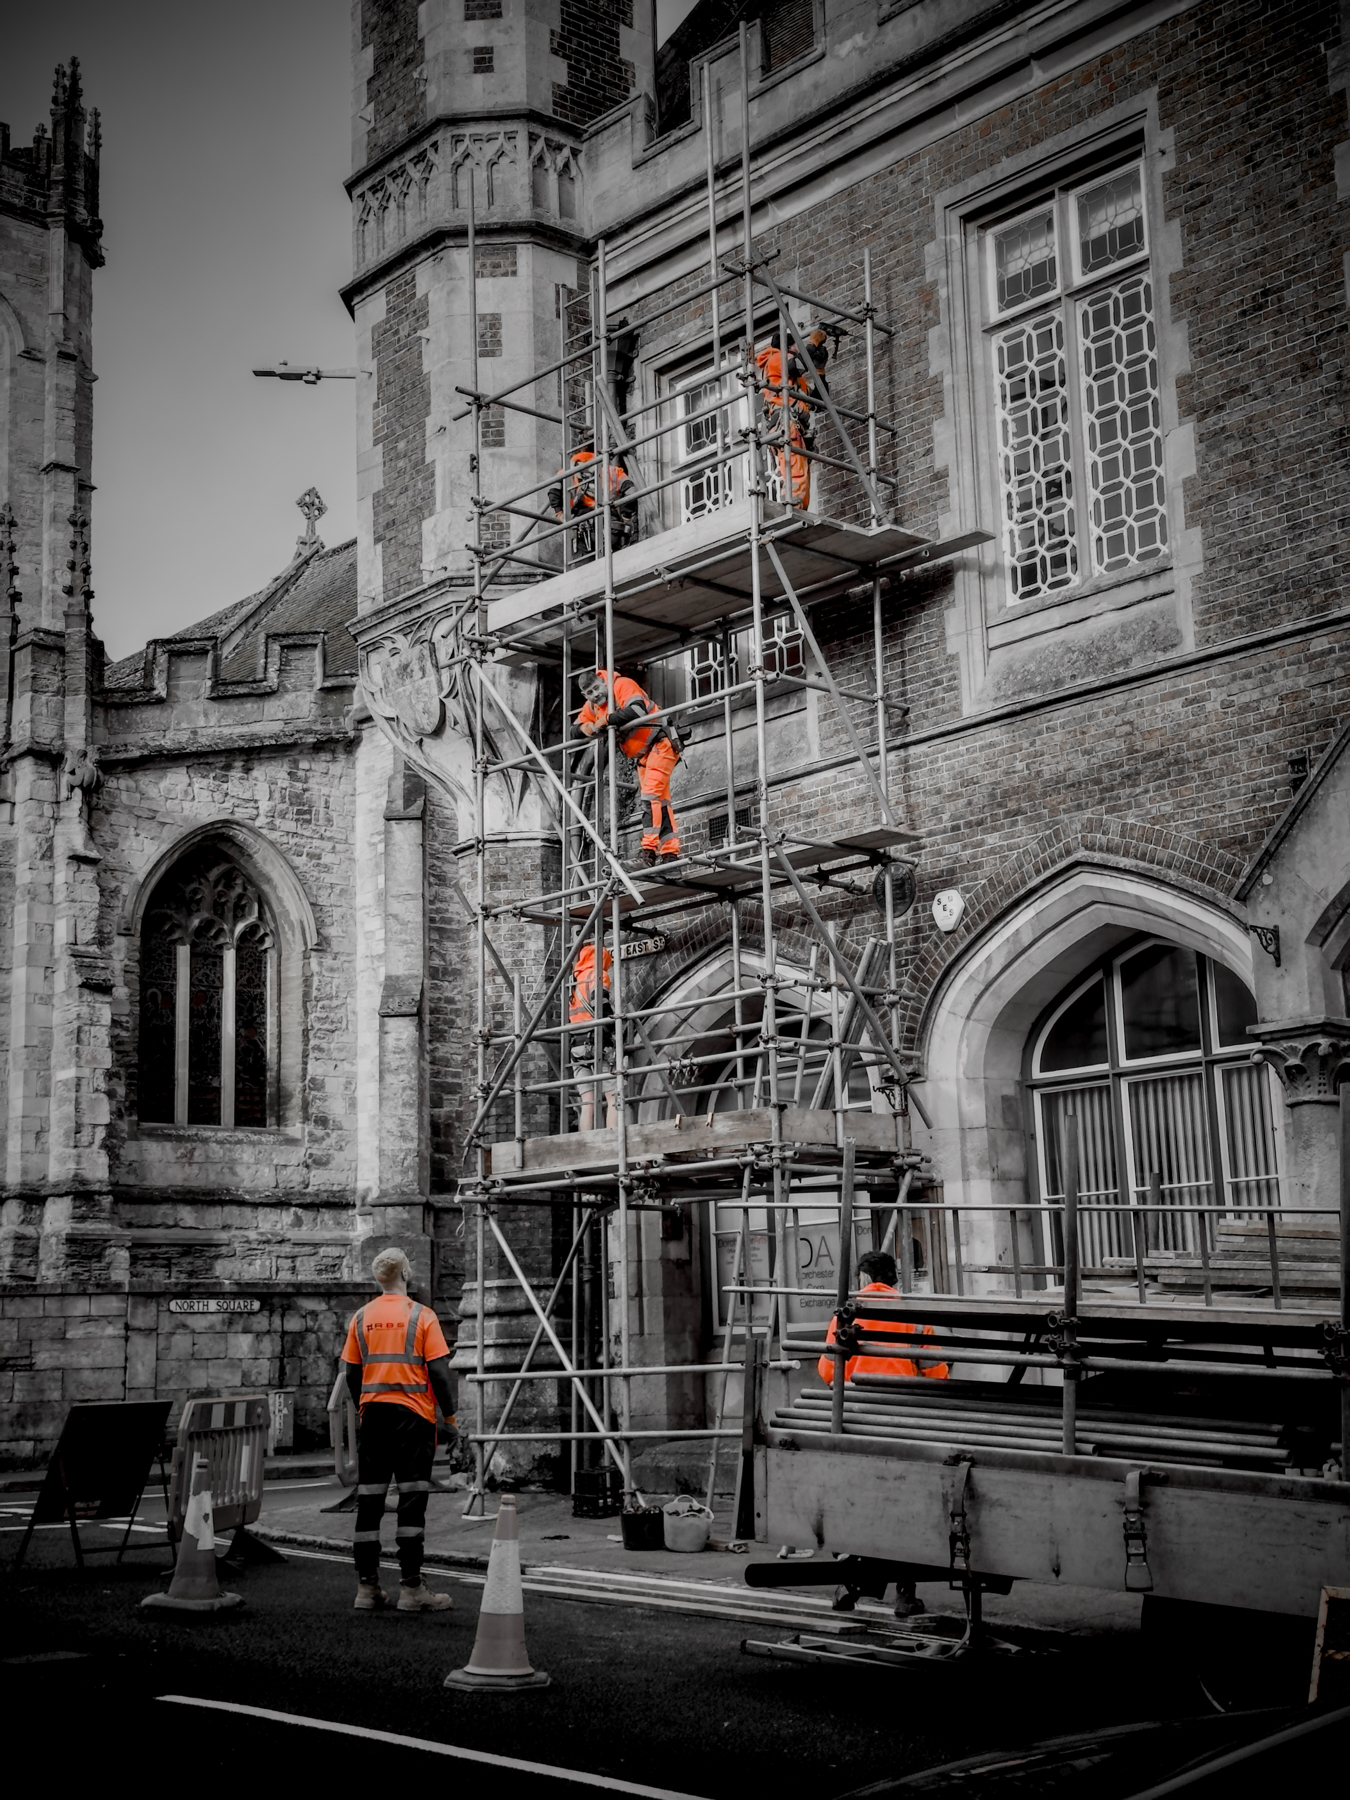 Construction workers in high visibility clothing assembling scaffolding beside a historic building.